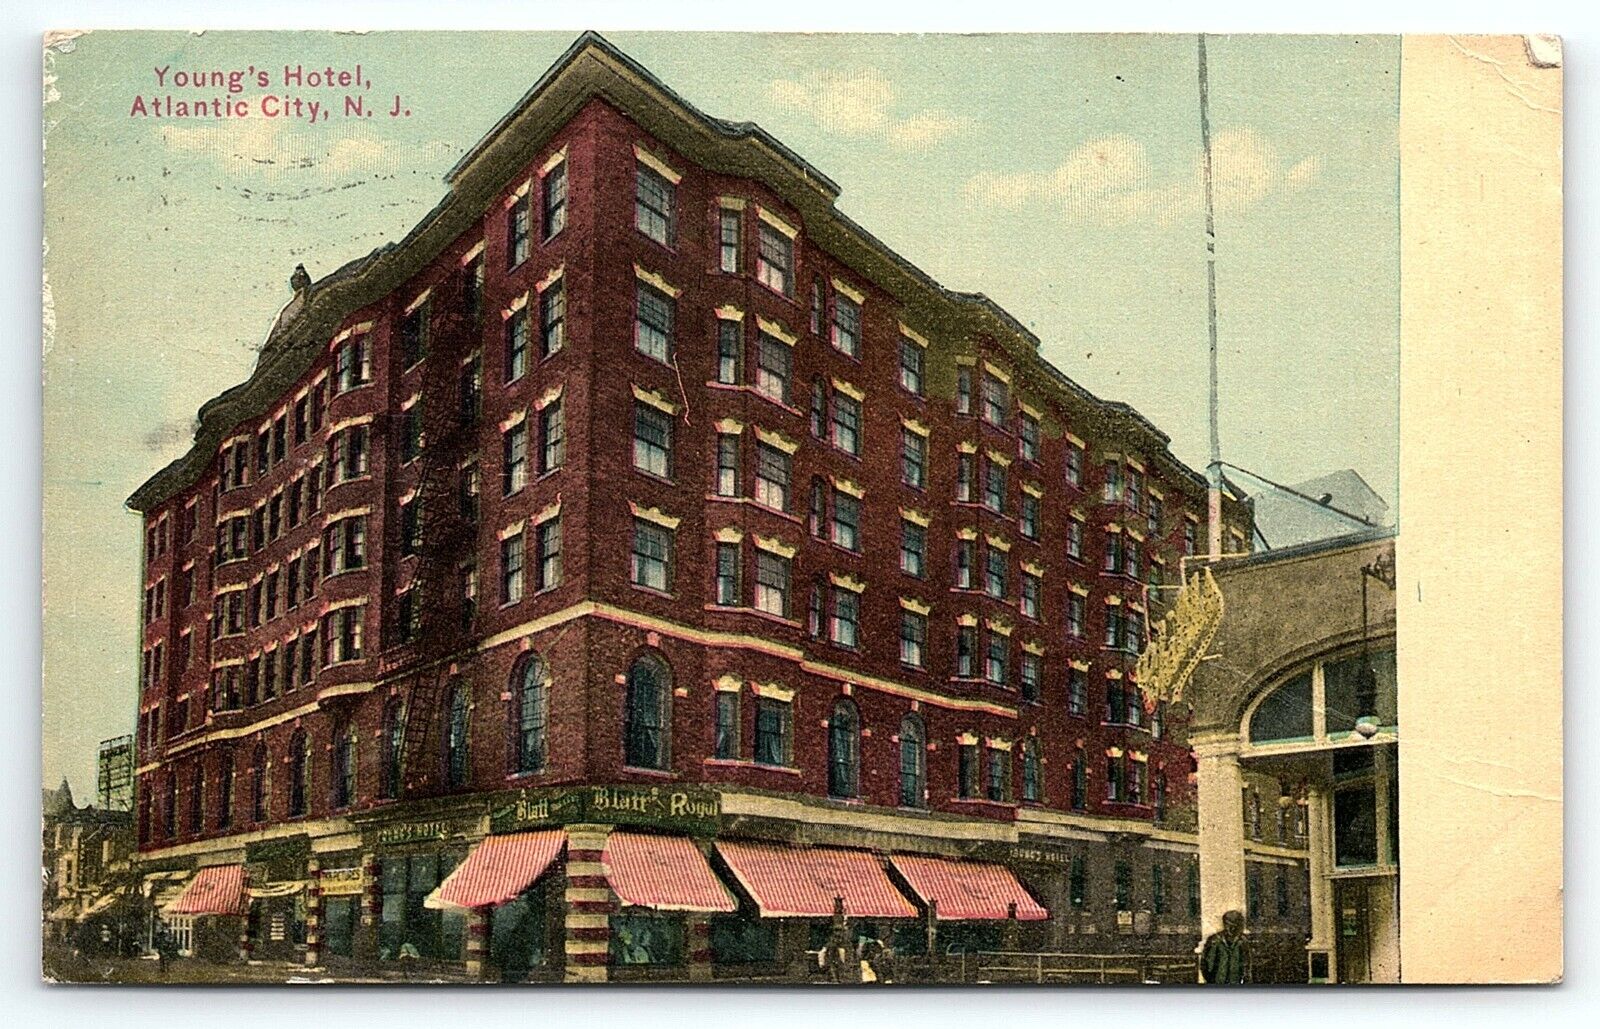 1912 ATLANTIC CITY NJ YOUNG'S HOTEL STREET VIEW BUSINESS AD POSTCARD P2101